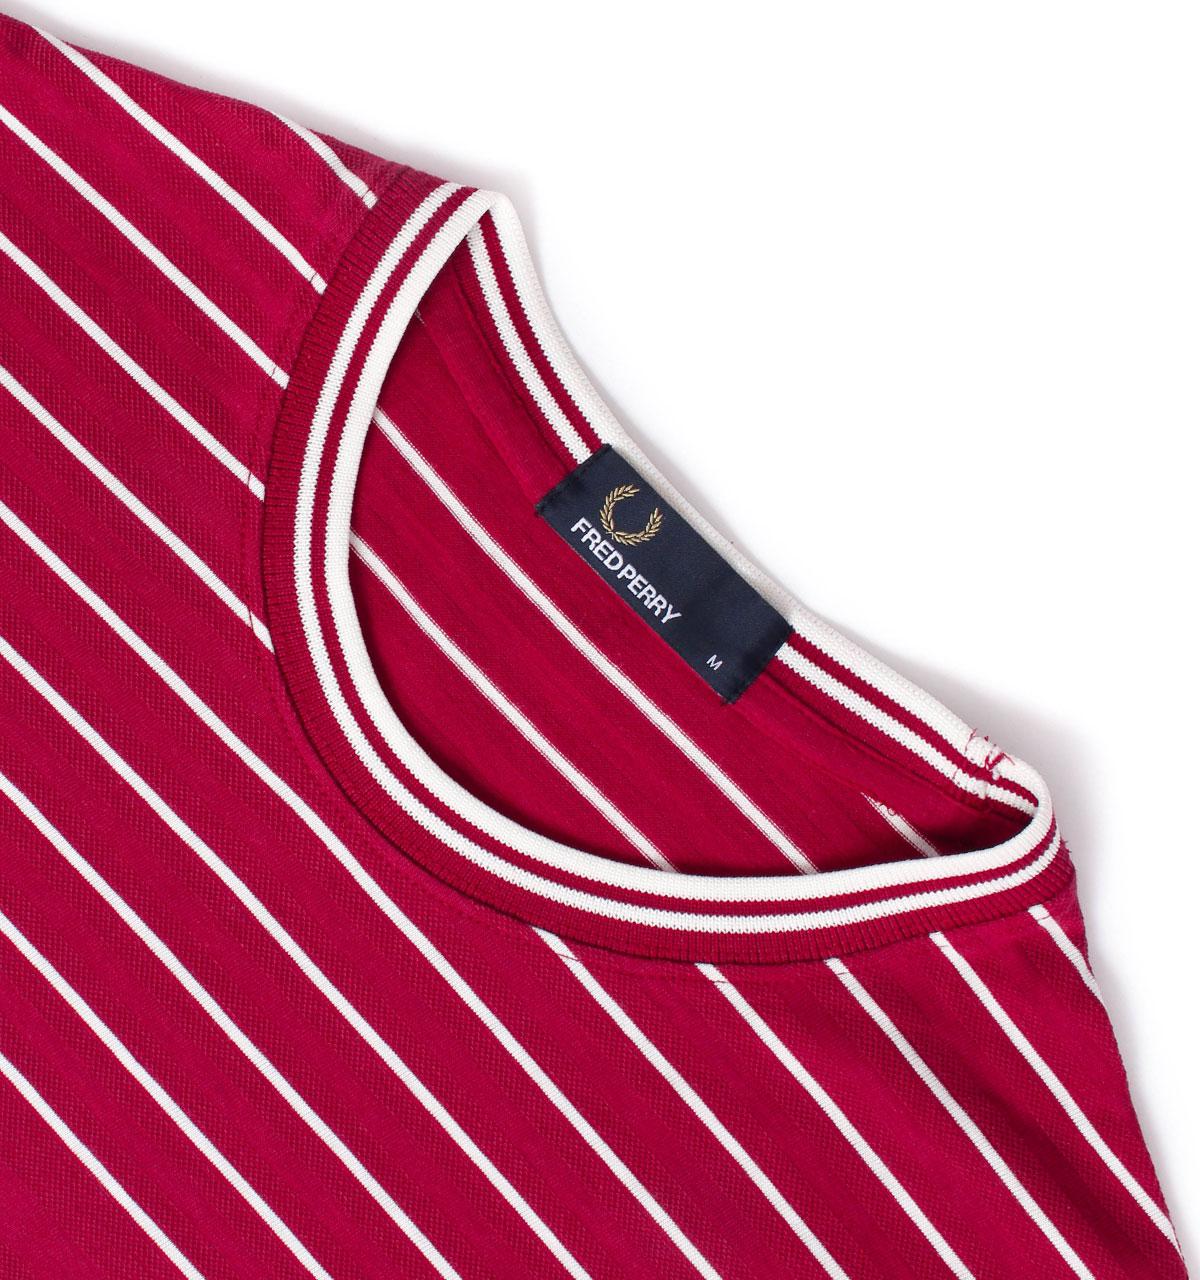 Lyst - Fred Perry Claret Red Pique Stripe Crew Neck T-shirt in Red for Men